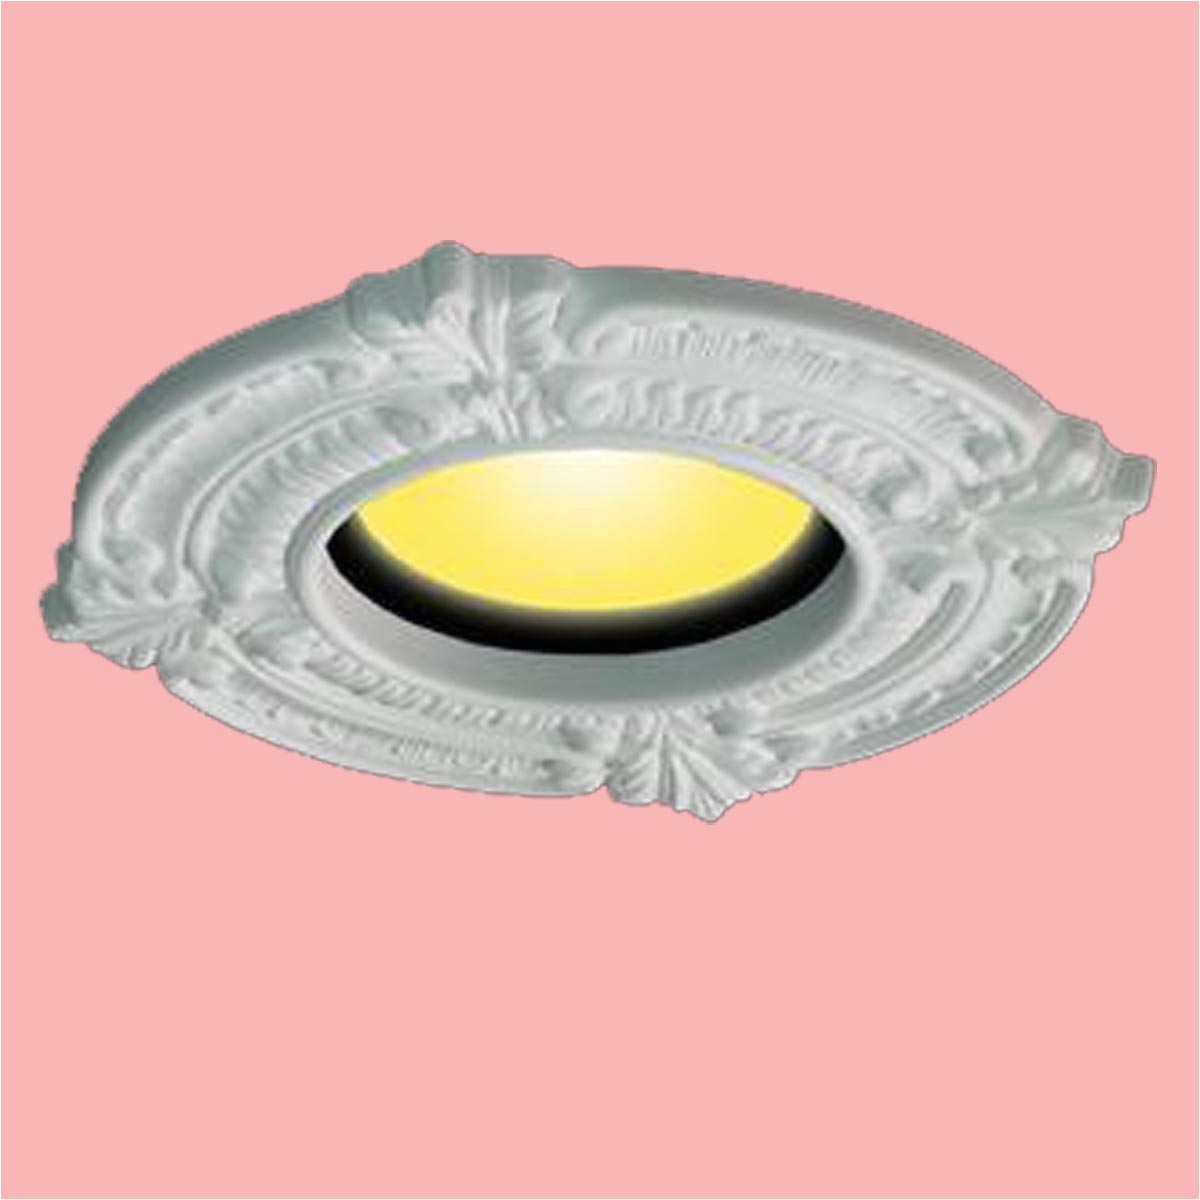 recessed urethane ceiling medallion trim white 6 inches id x 10 inches od16483grid